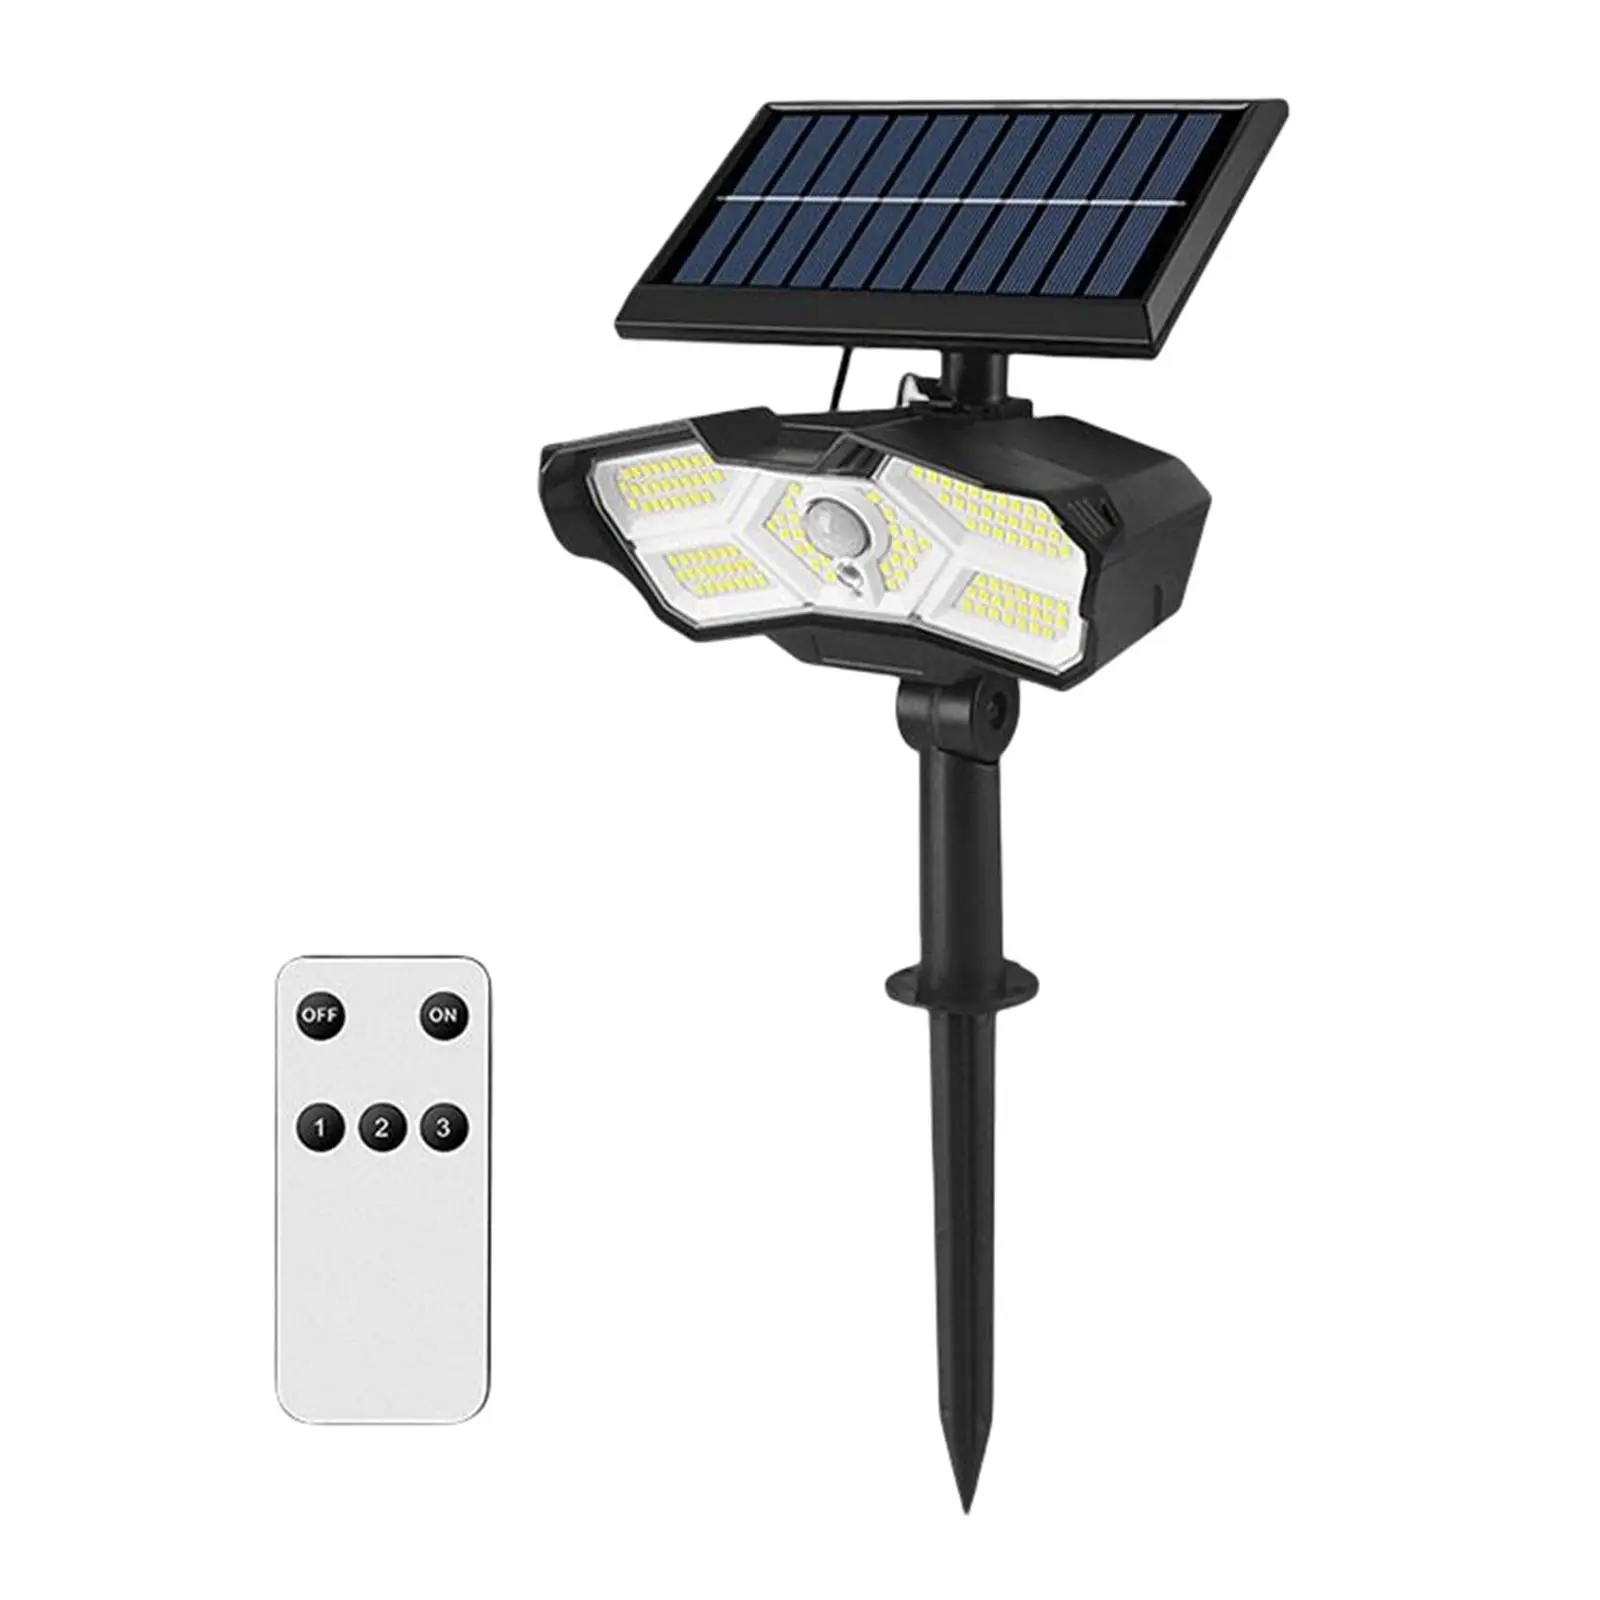 Outdoor Solar Lights 3 Lighting Modes Lamp with Remote Control Lighting Path Lights Solar Garden Lights for Yard Driveway Lawn